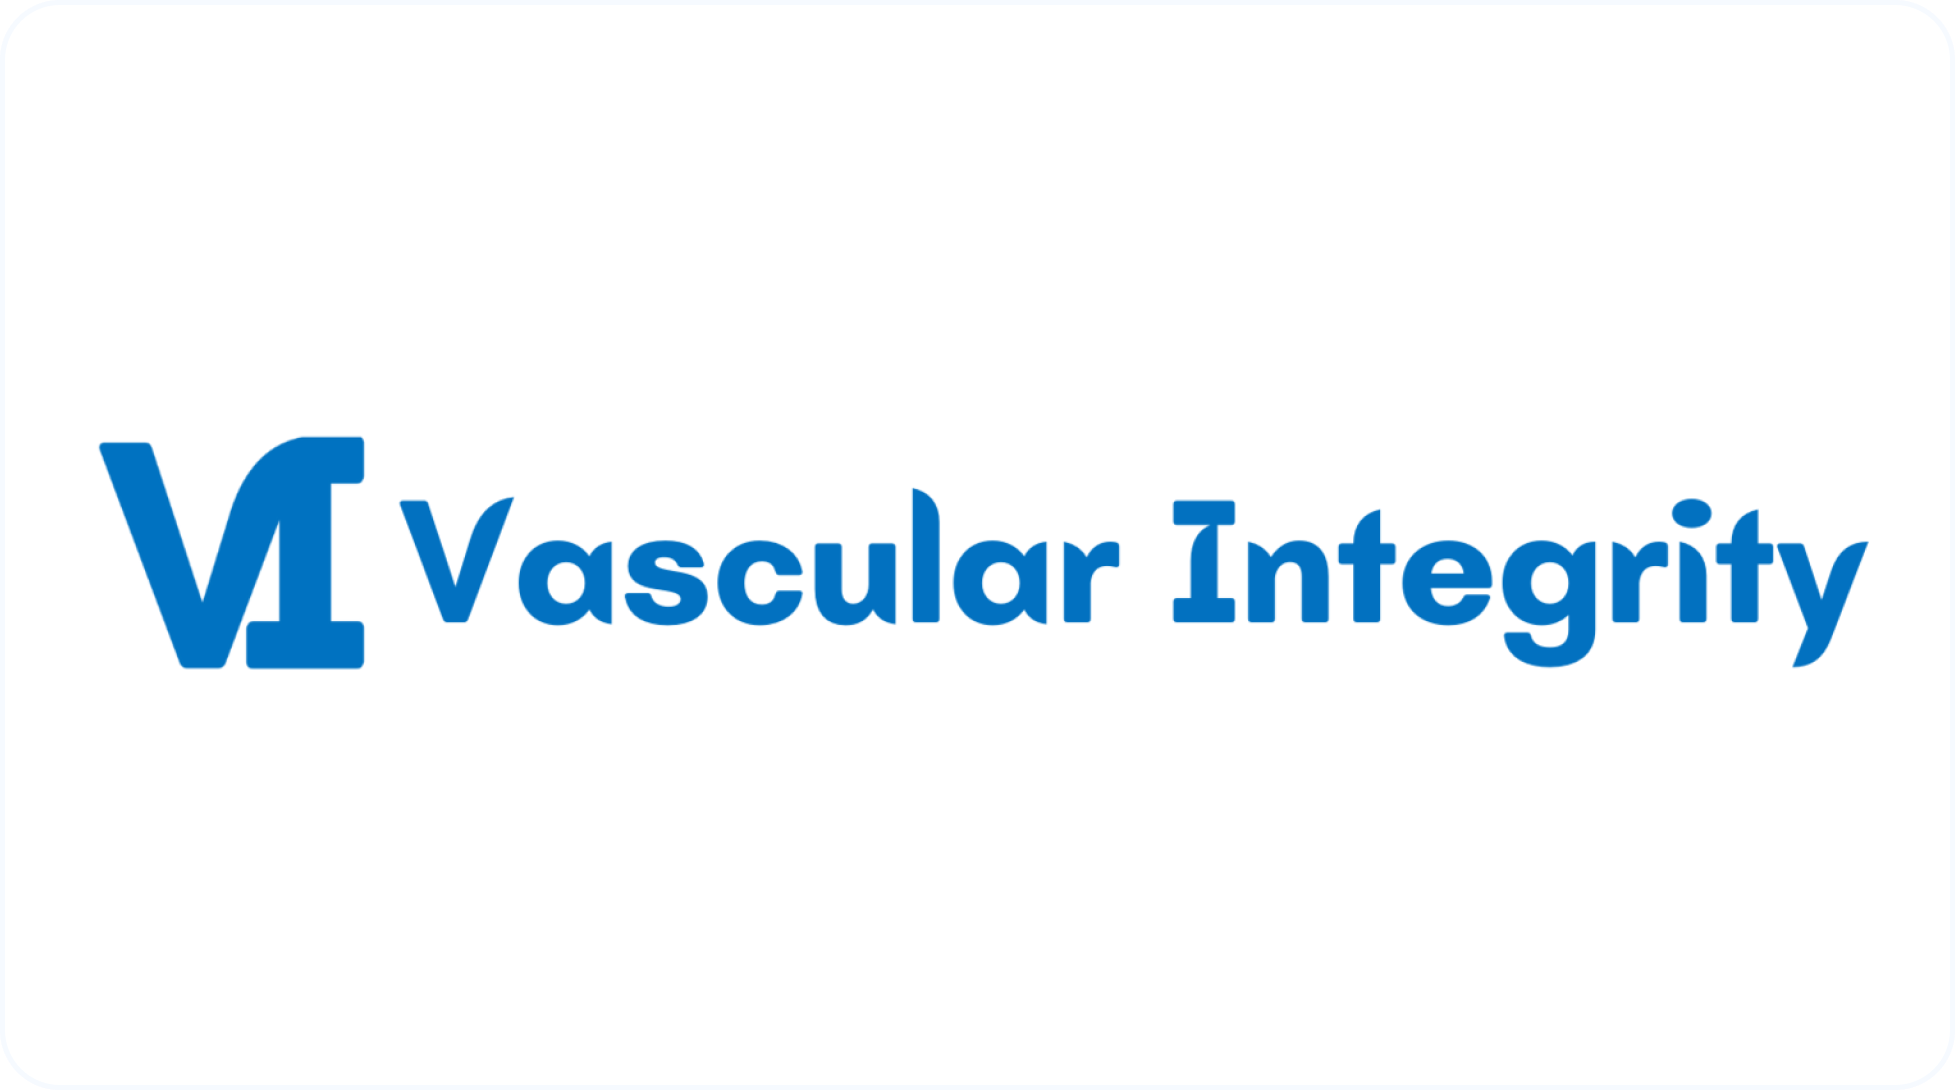 Vascular Integrity Supporting Evidence